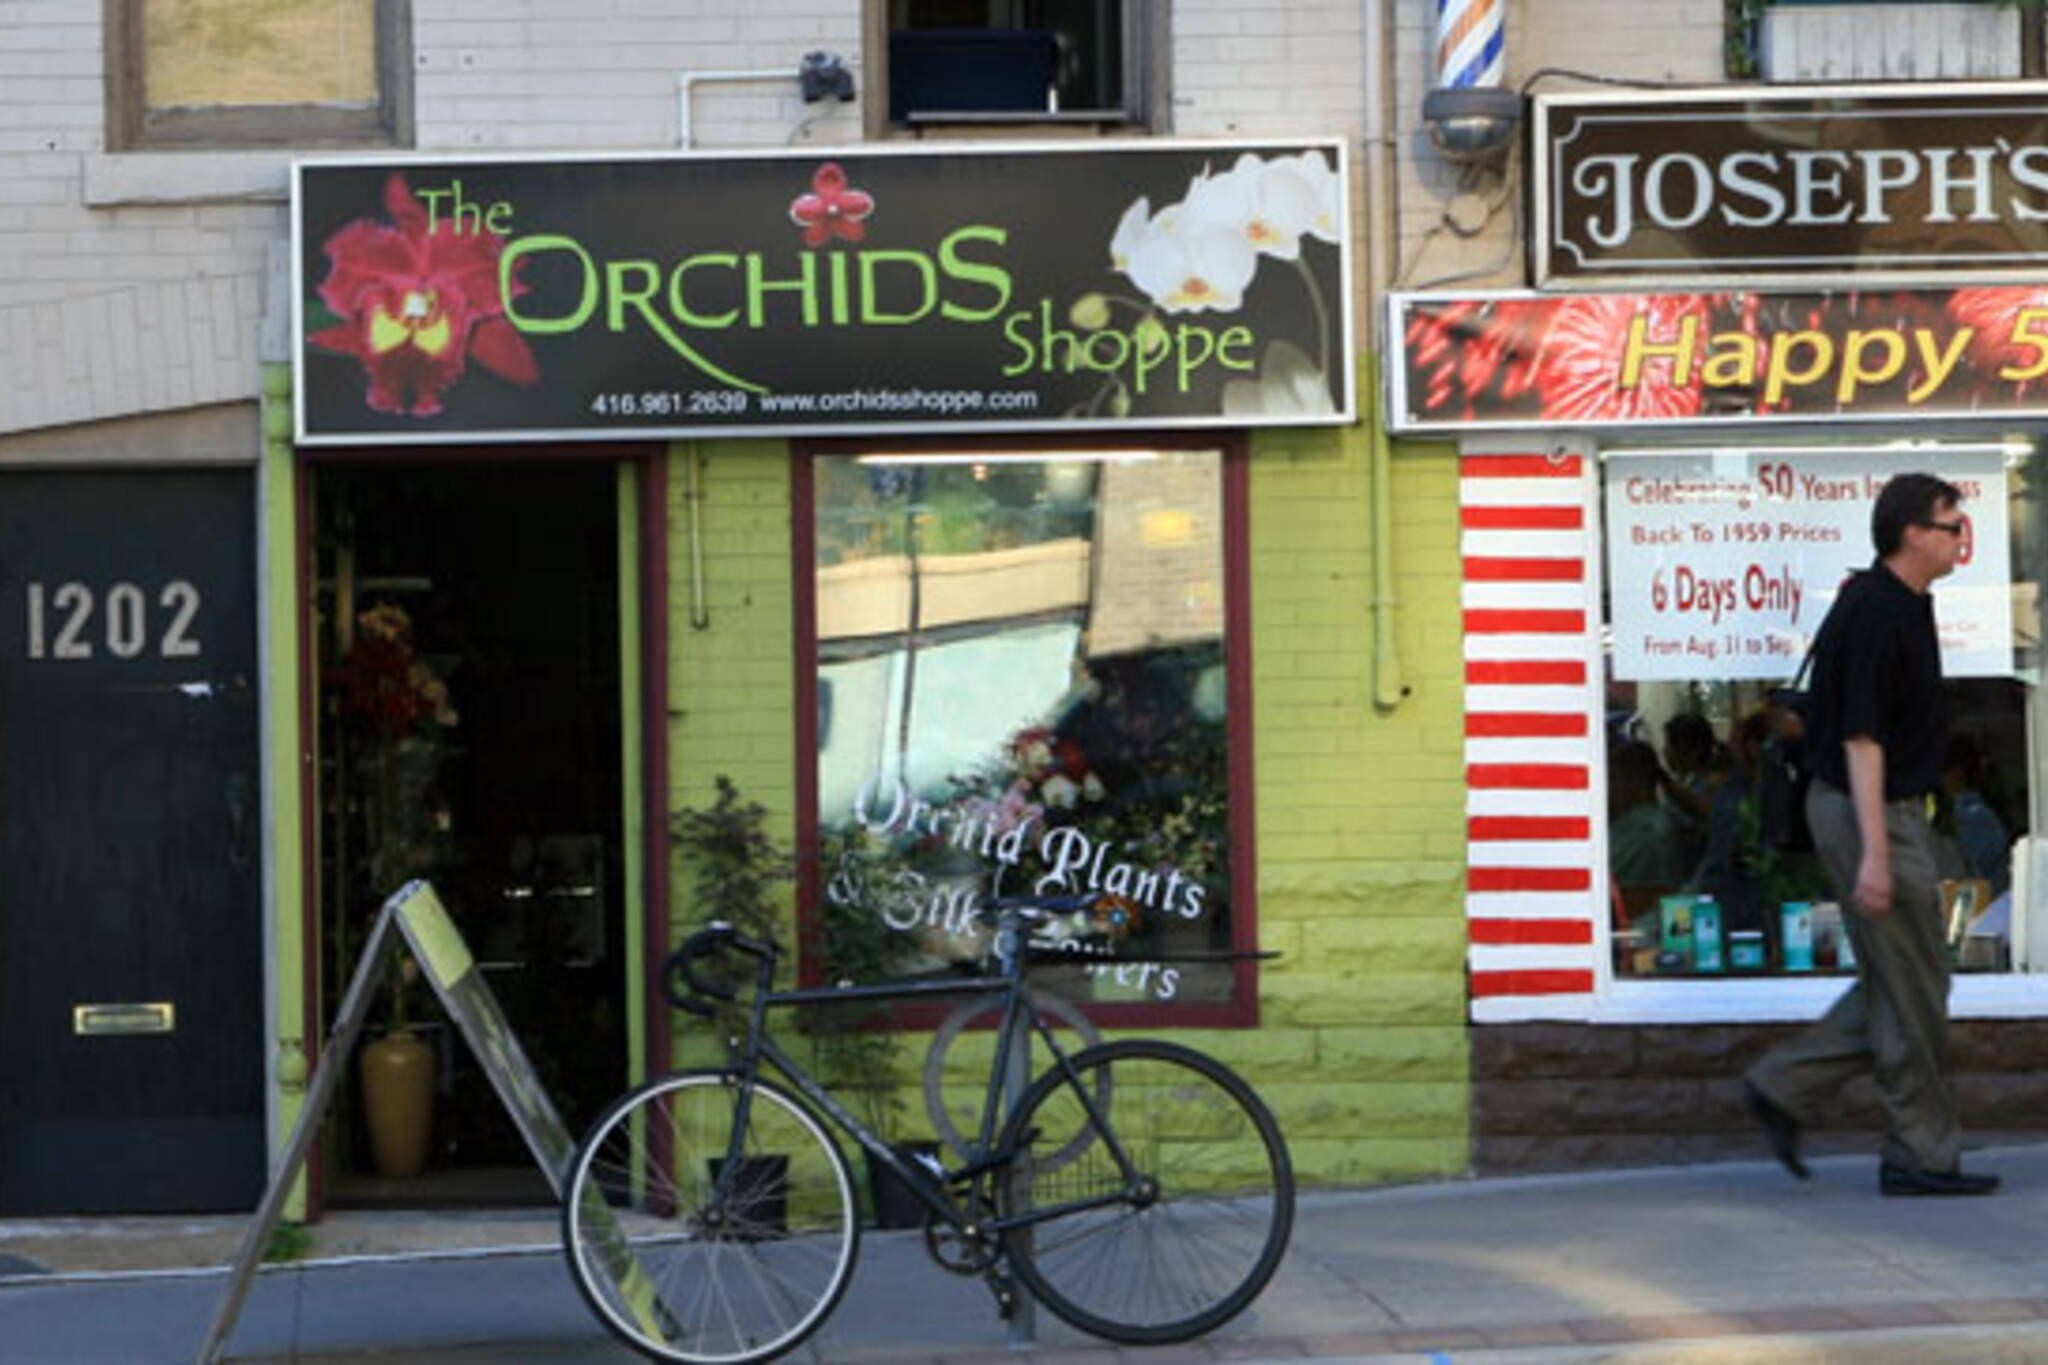 The Orchids Shoppe